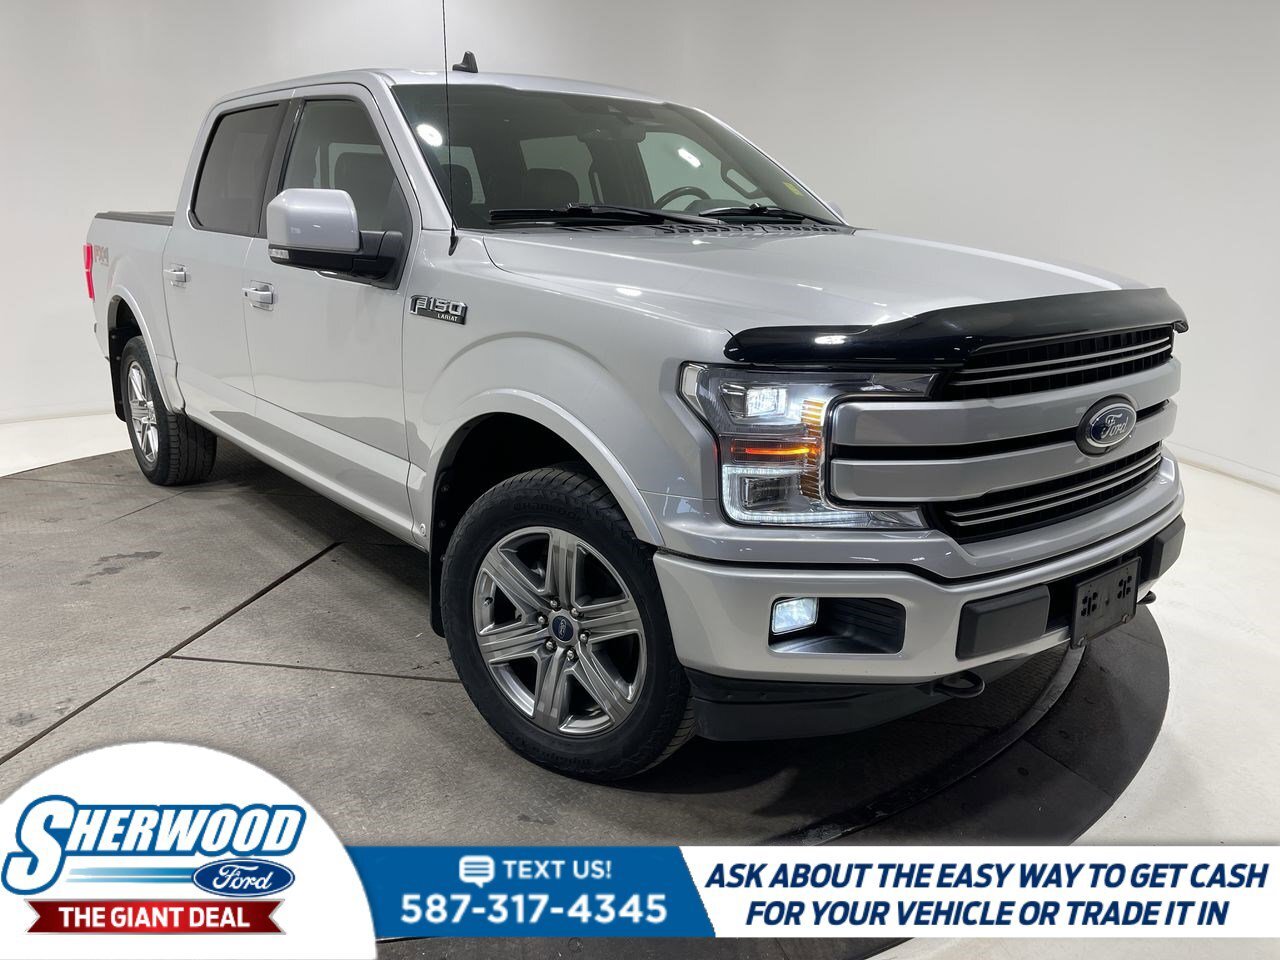 2019 Ford F-150 Lariat $0 Down $181 Weekly NEW TIRES/REAR BRAKES